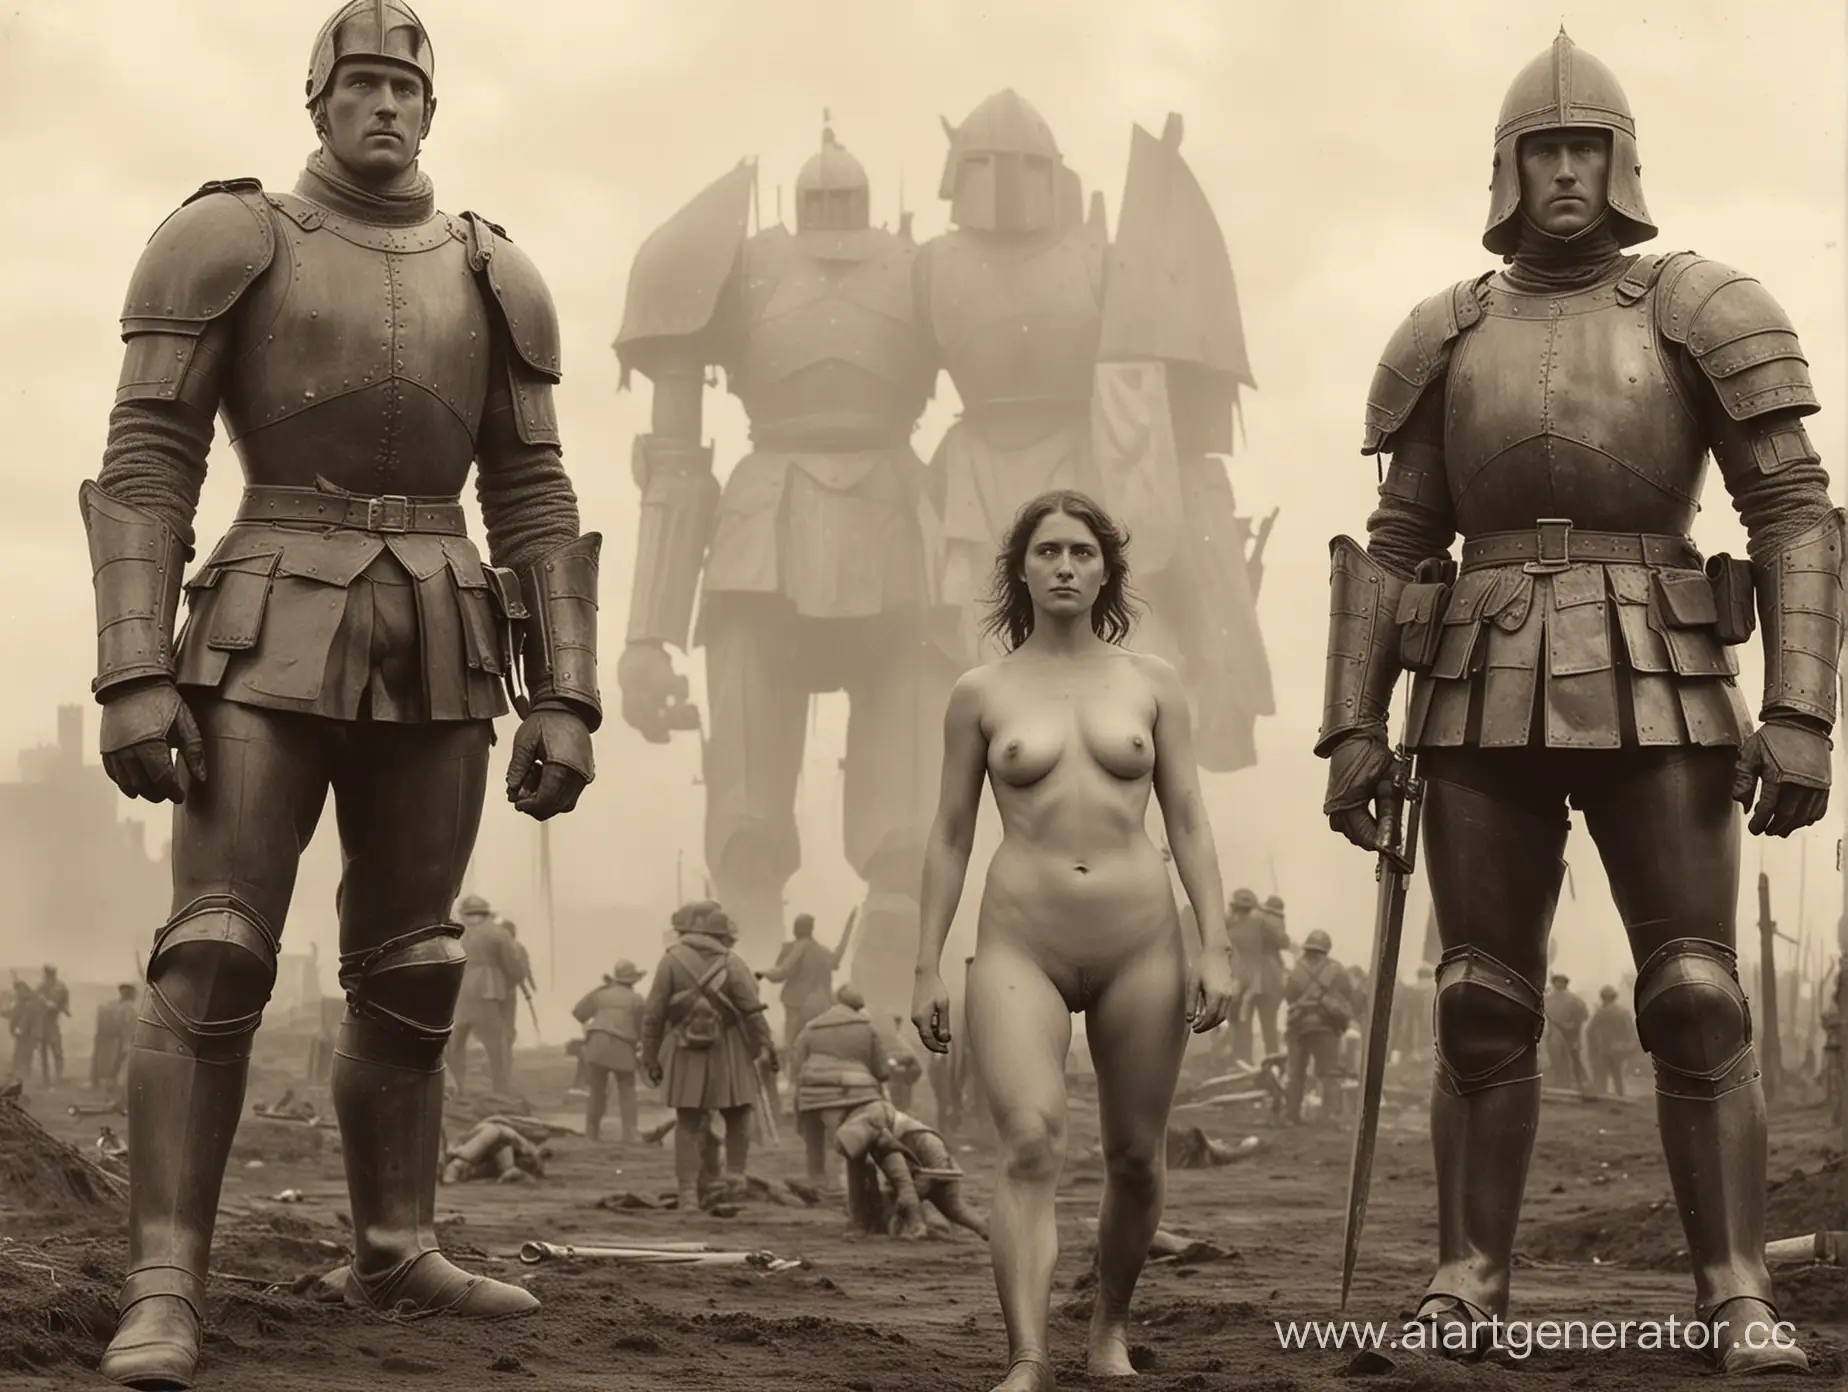 Giant-Soldier-and-Knight-Stand-with-Woman-on-First-World-War-Battlefield